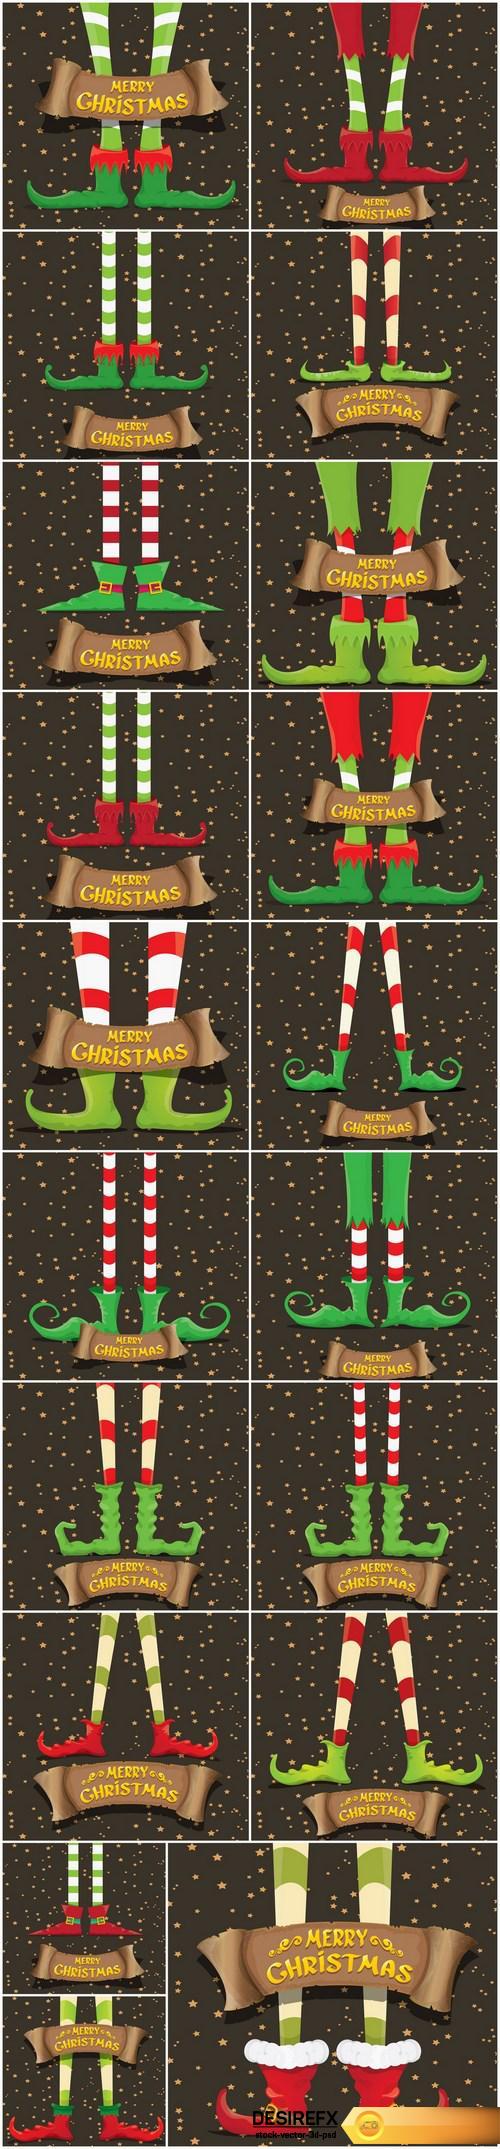 Collection of backgrounds with Christmas elves - 13xEPS